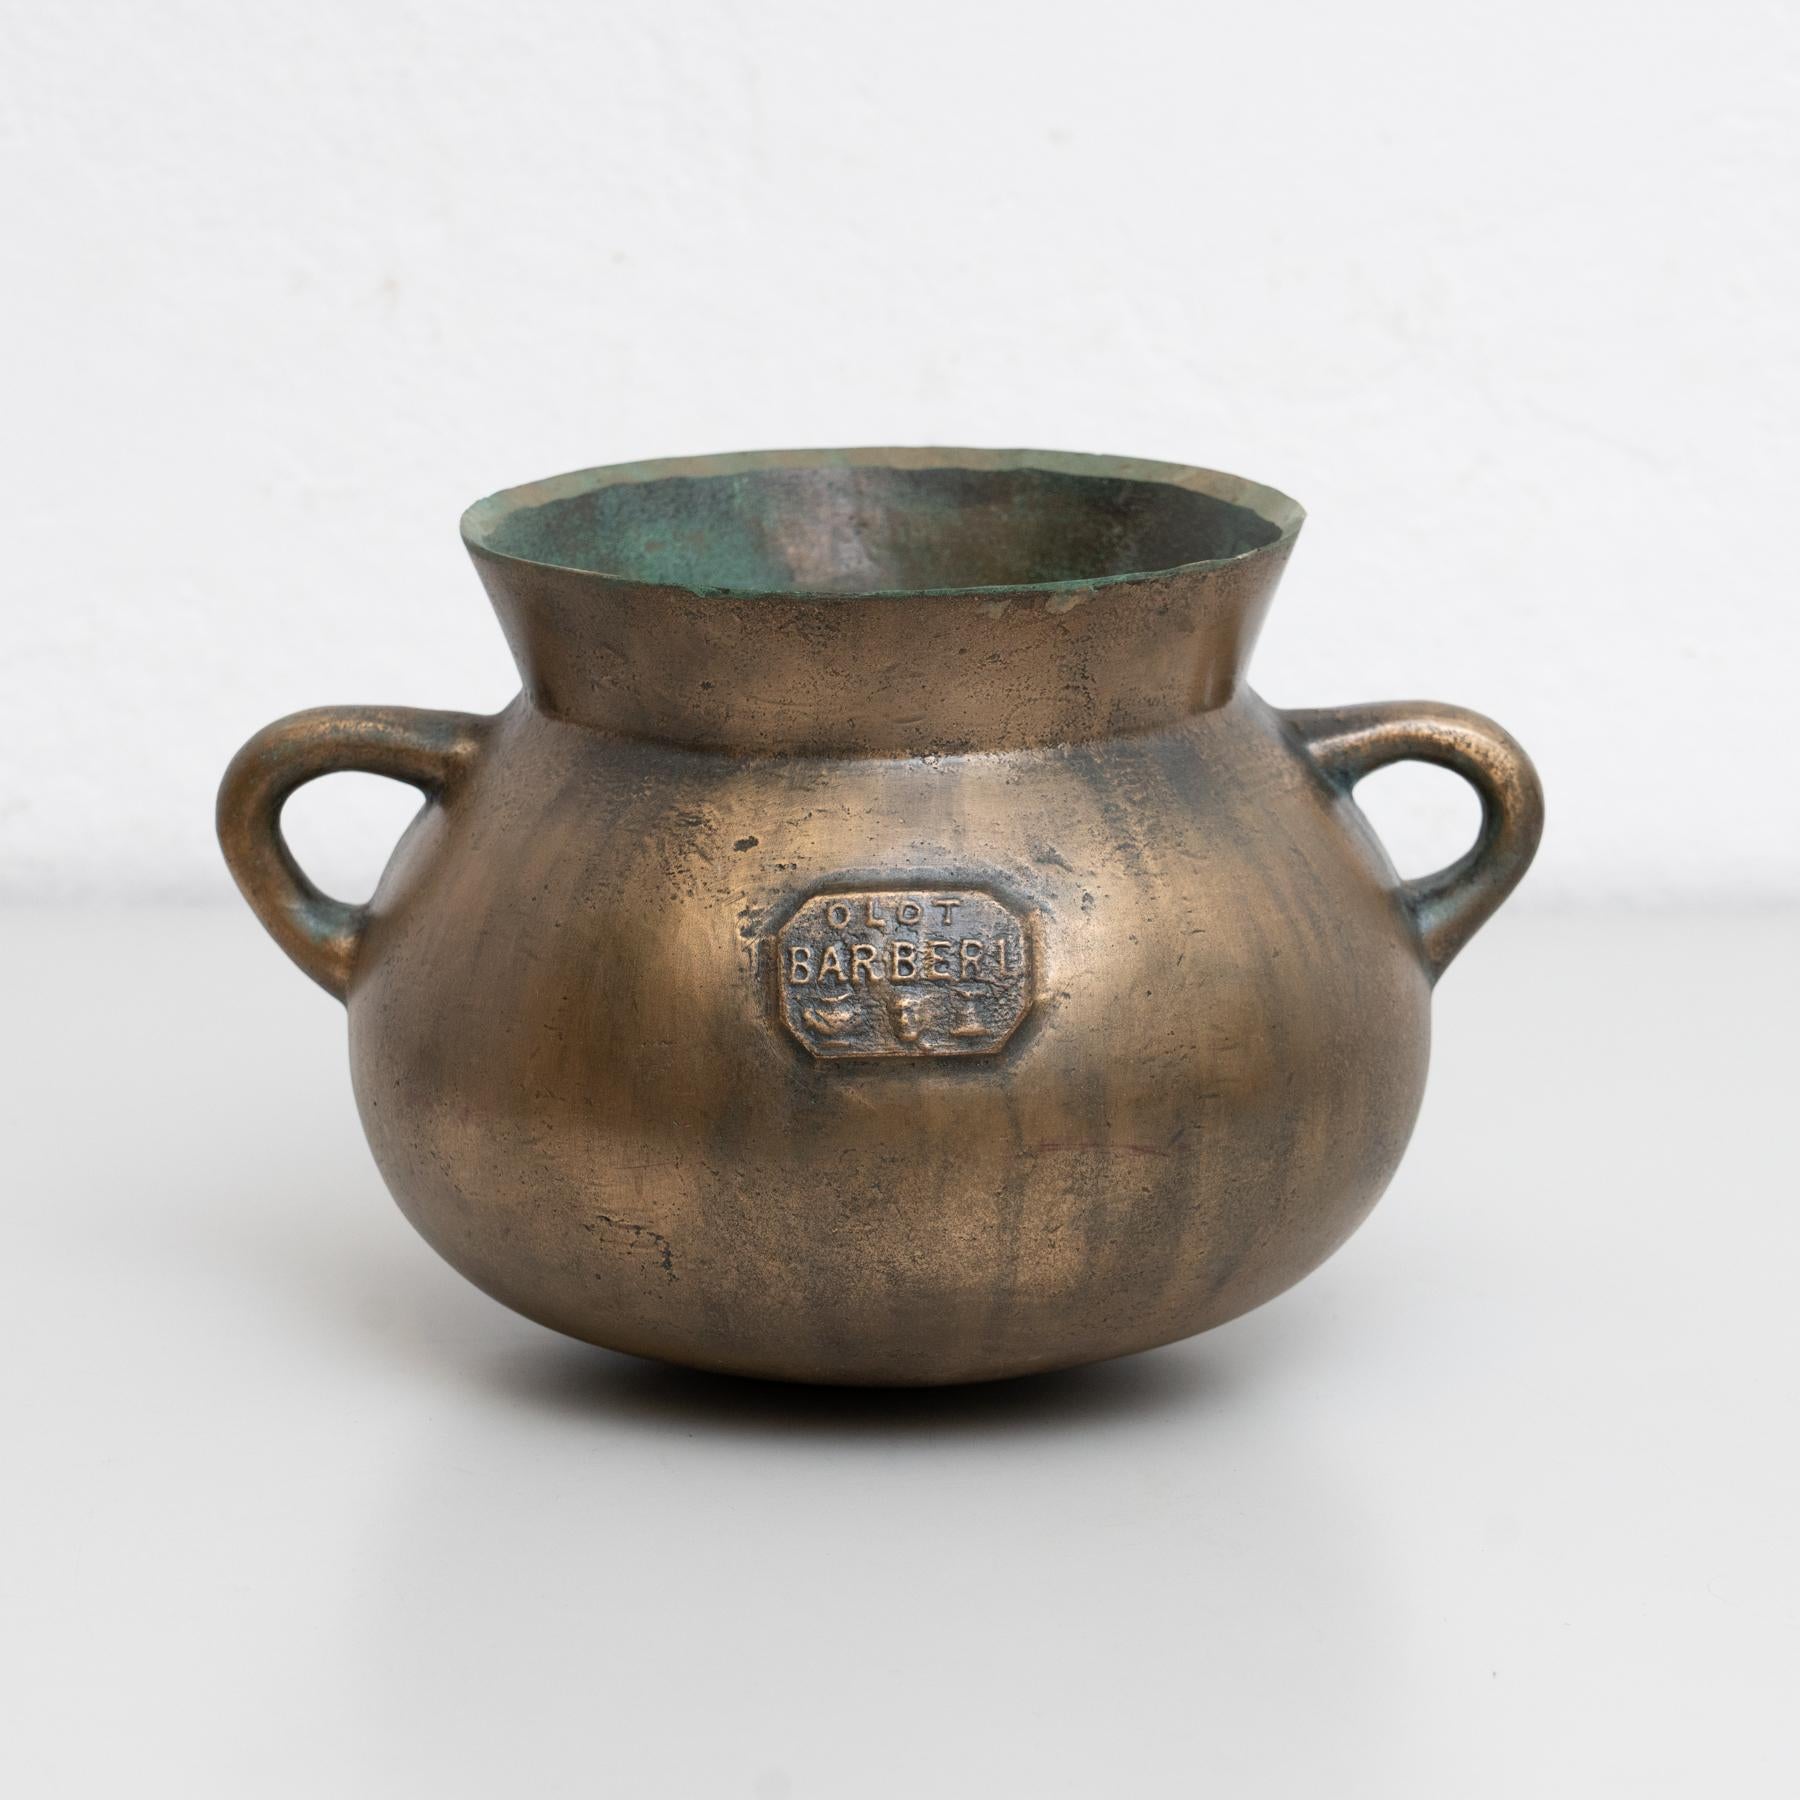 Vintage bronze pot. 

By Barberí foundry in Olot, Spain circa 1950.

In original condition, with minor wear consistent with age and use, preserving a beautiful patina.

Materials:
Bronze.
 